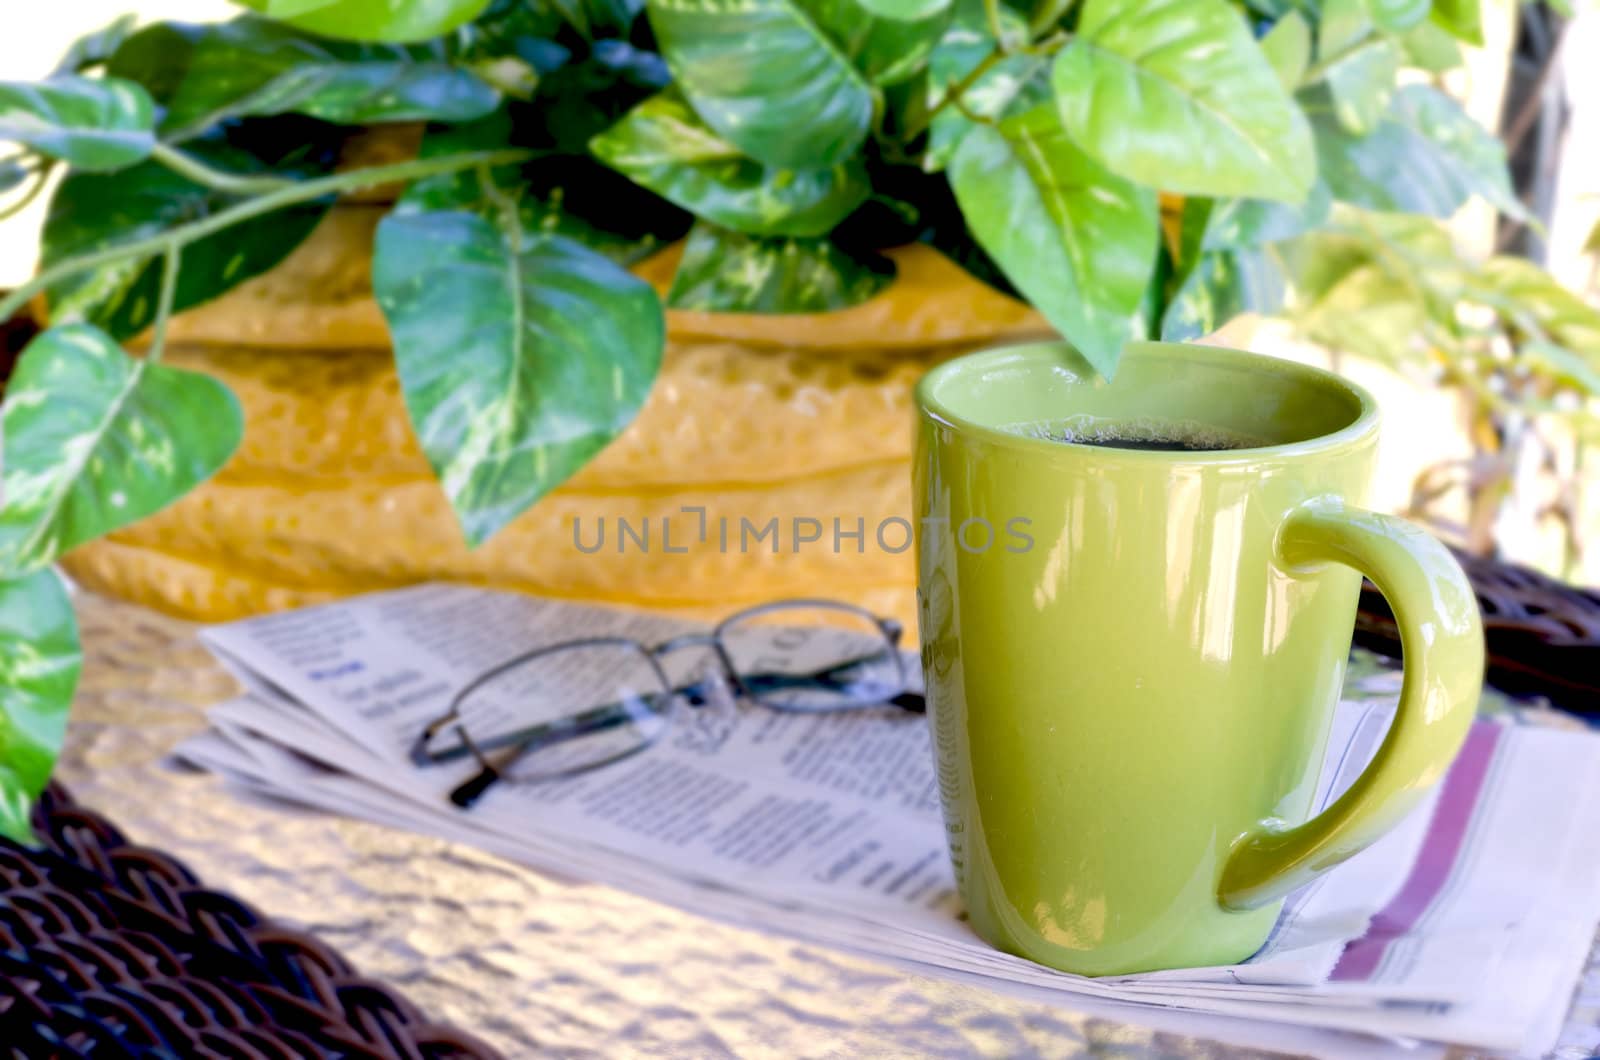 Morning coffee with newspaper and reading glasses.  Green plant in background.